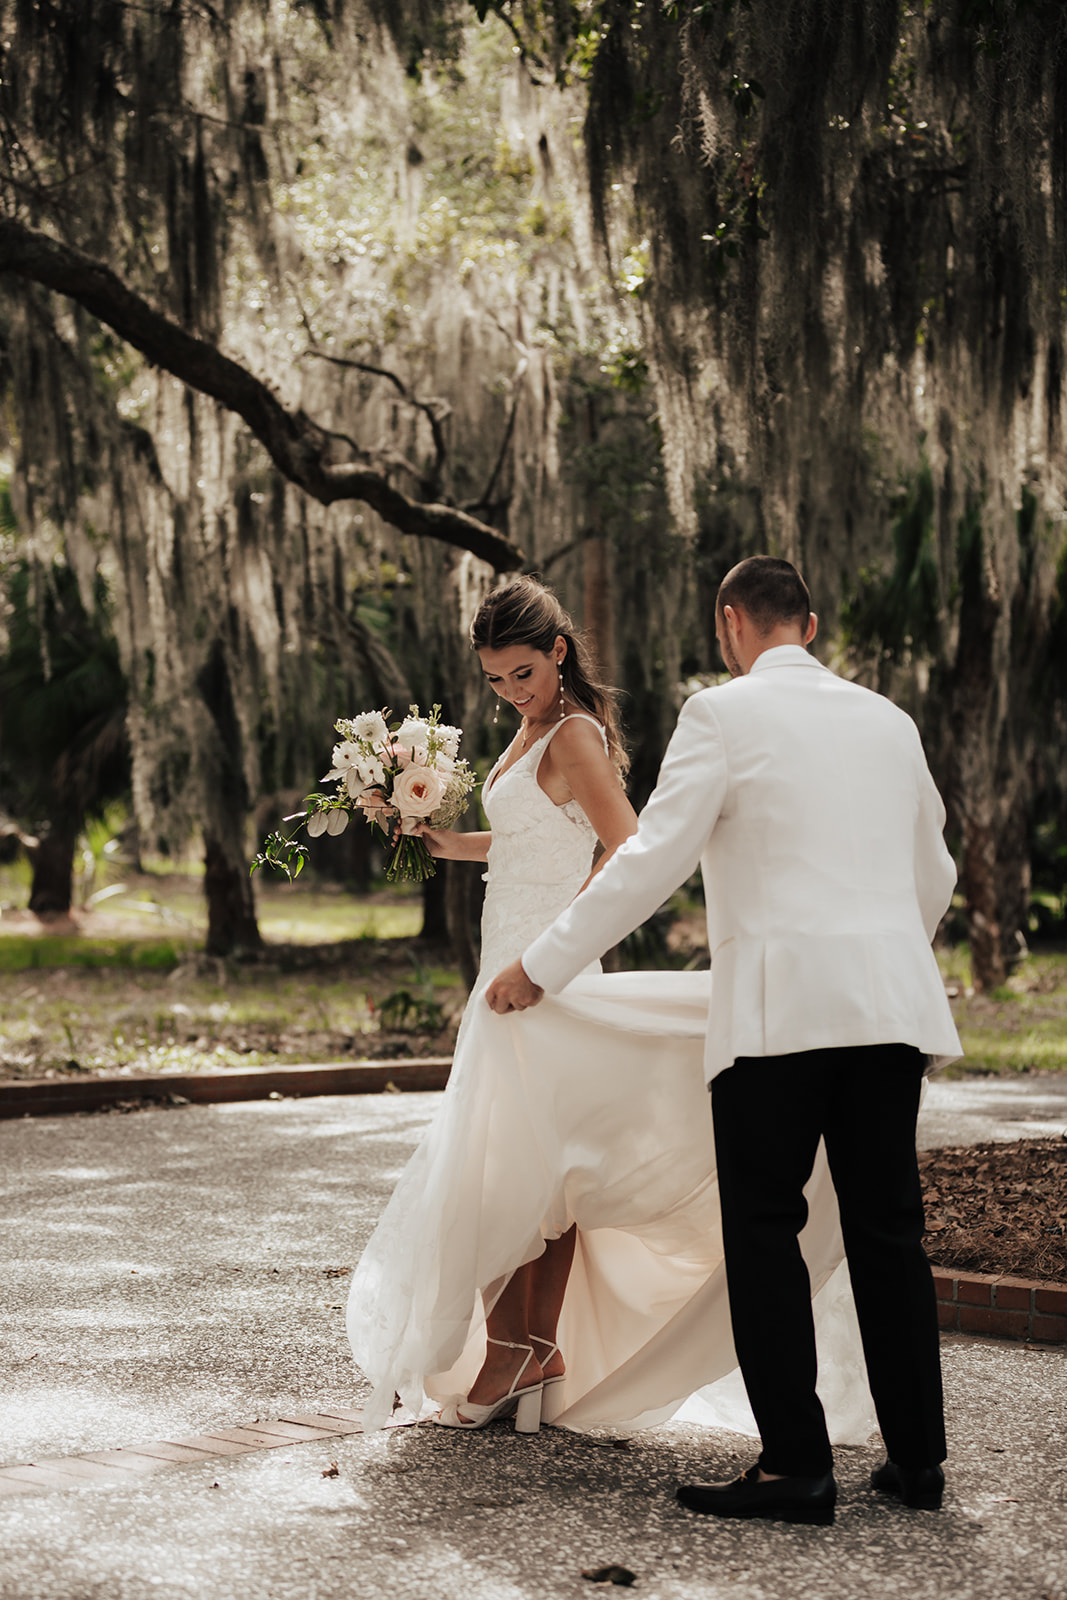 Groom flussing the dress at Daufuskie Ilsnad wedding. Couple surrounded by oak tress and spanish moss.